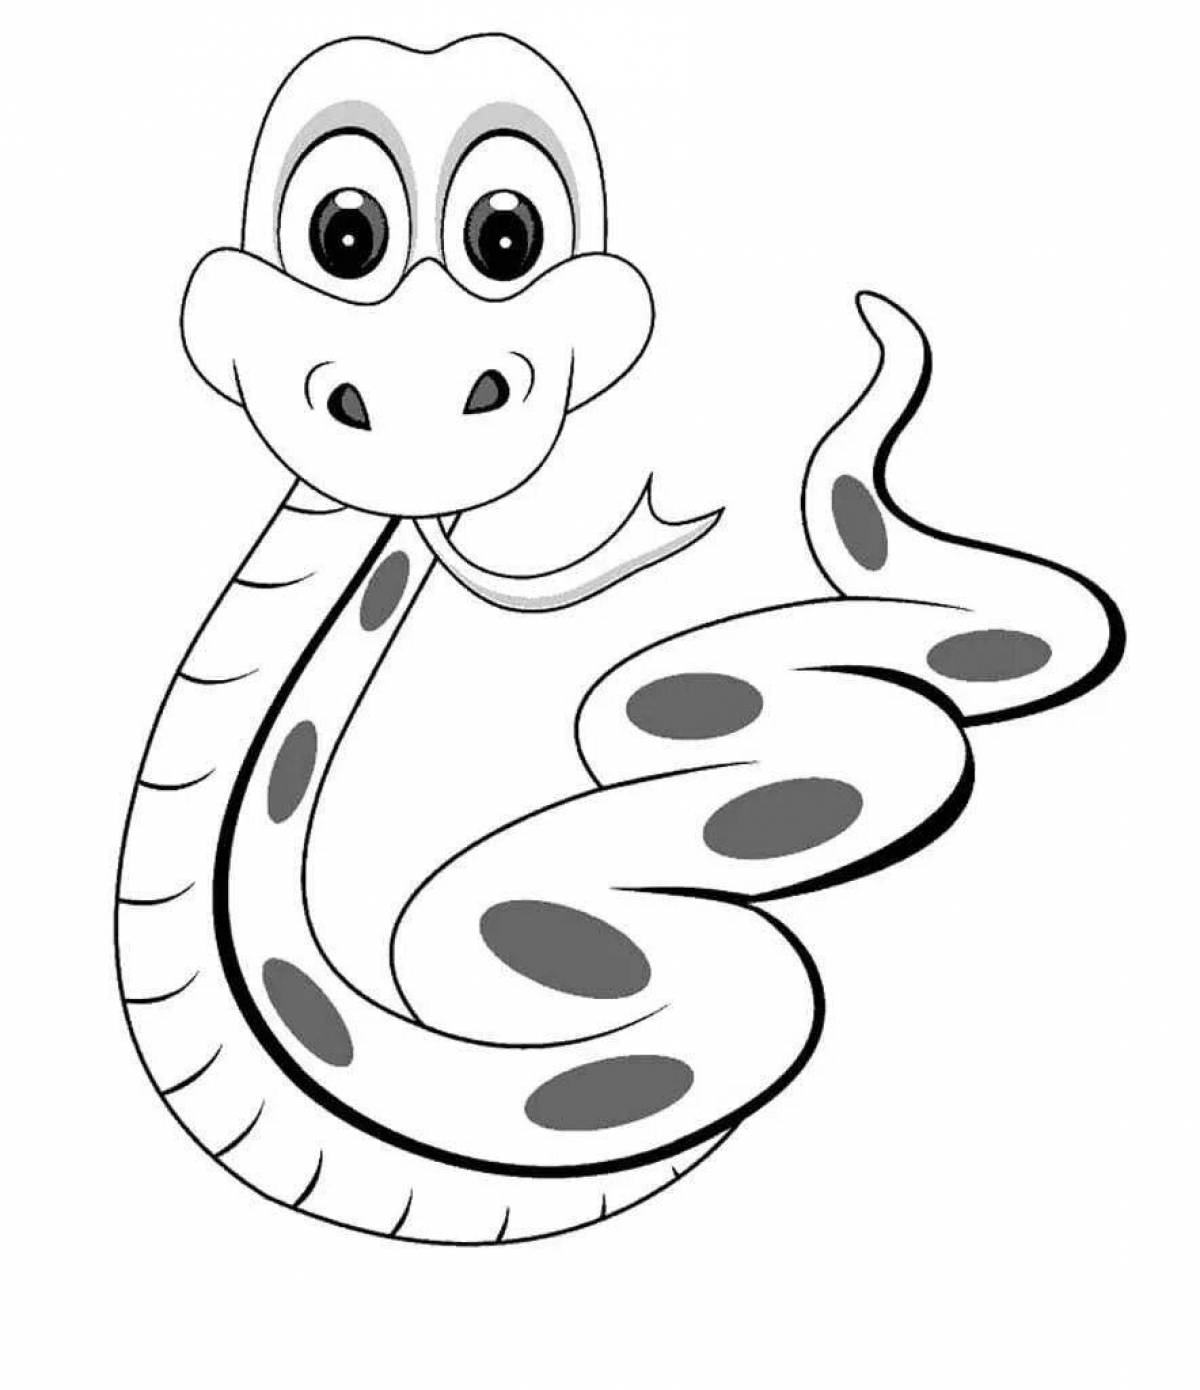 Great snake coloring book